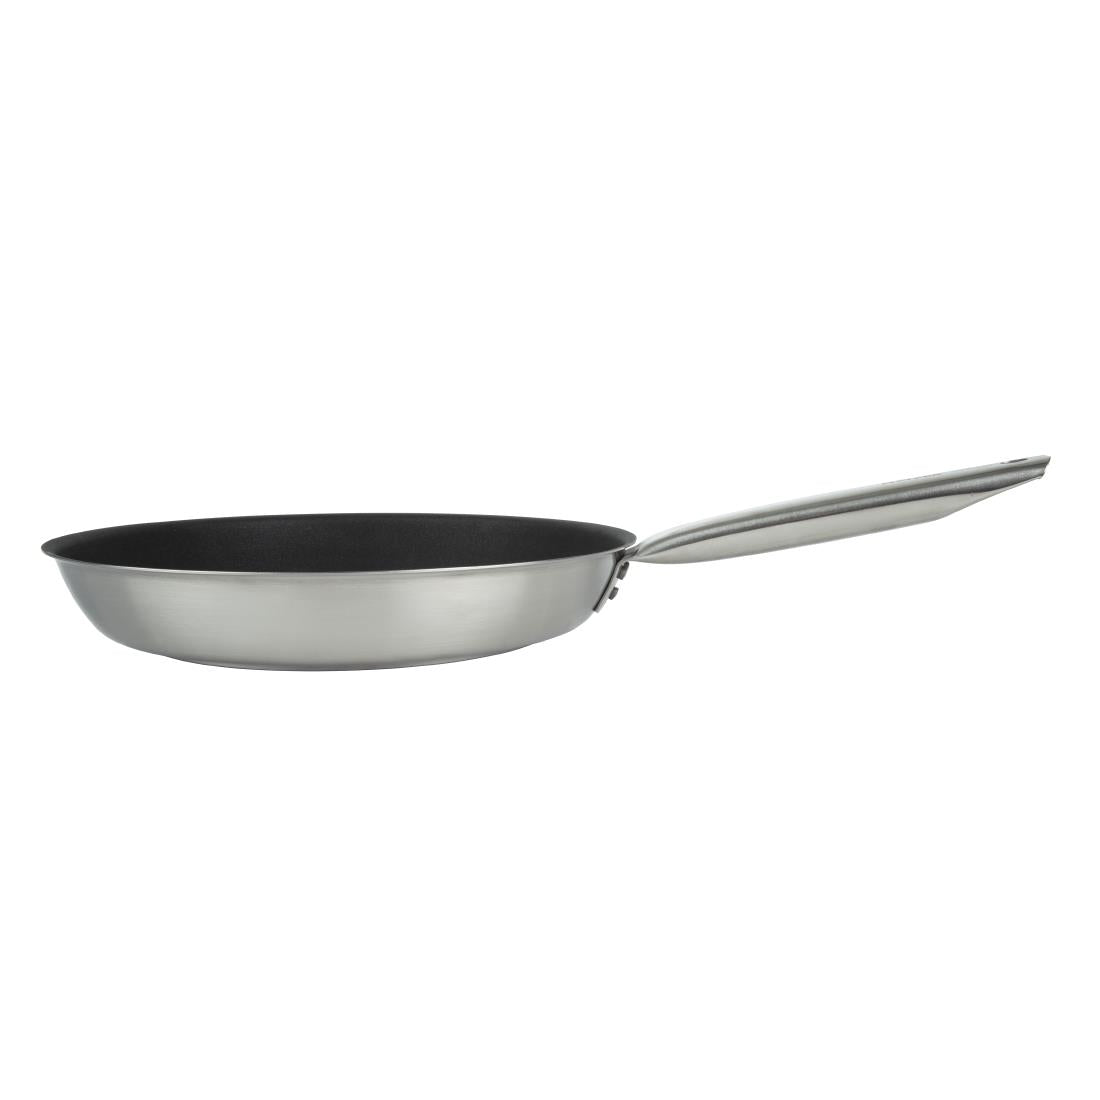 CX541 Matfer Bourgeat Tradition Pro Non-Stick Frying Pan 32cm JD Catering Equipment Solutions Ltd